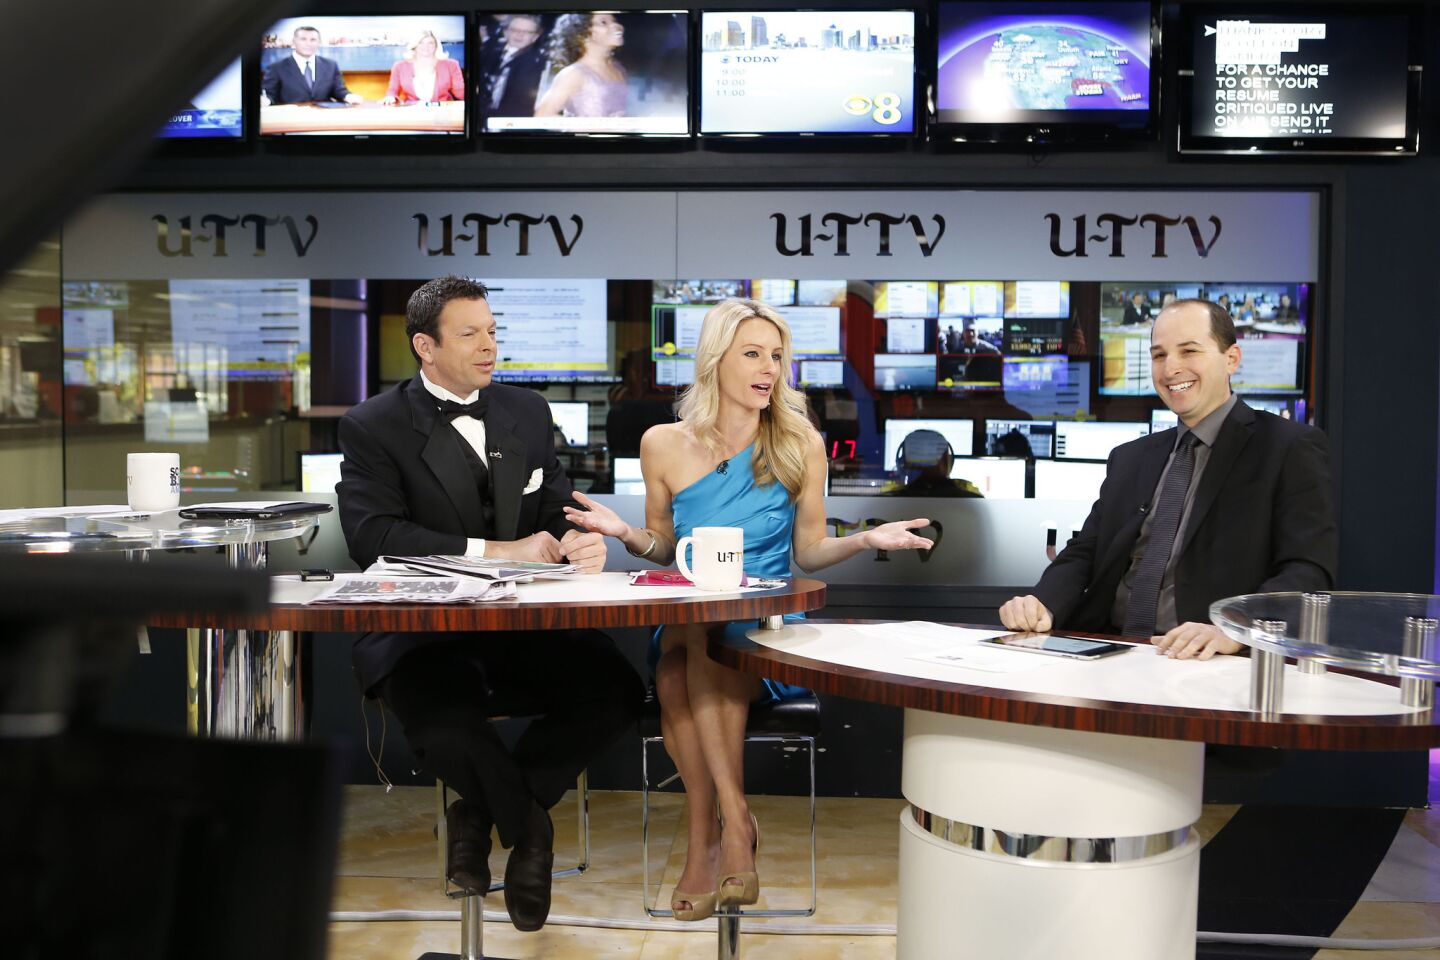 Scott Kaplan (left) and Amber Mesker, the hosts of “Front Page with Scott & Amber,” on the set of U-T TV with Cory Fish, right, then human resources manager for the newspaper. His appearances were a regular segment.